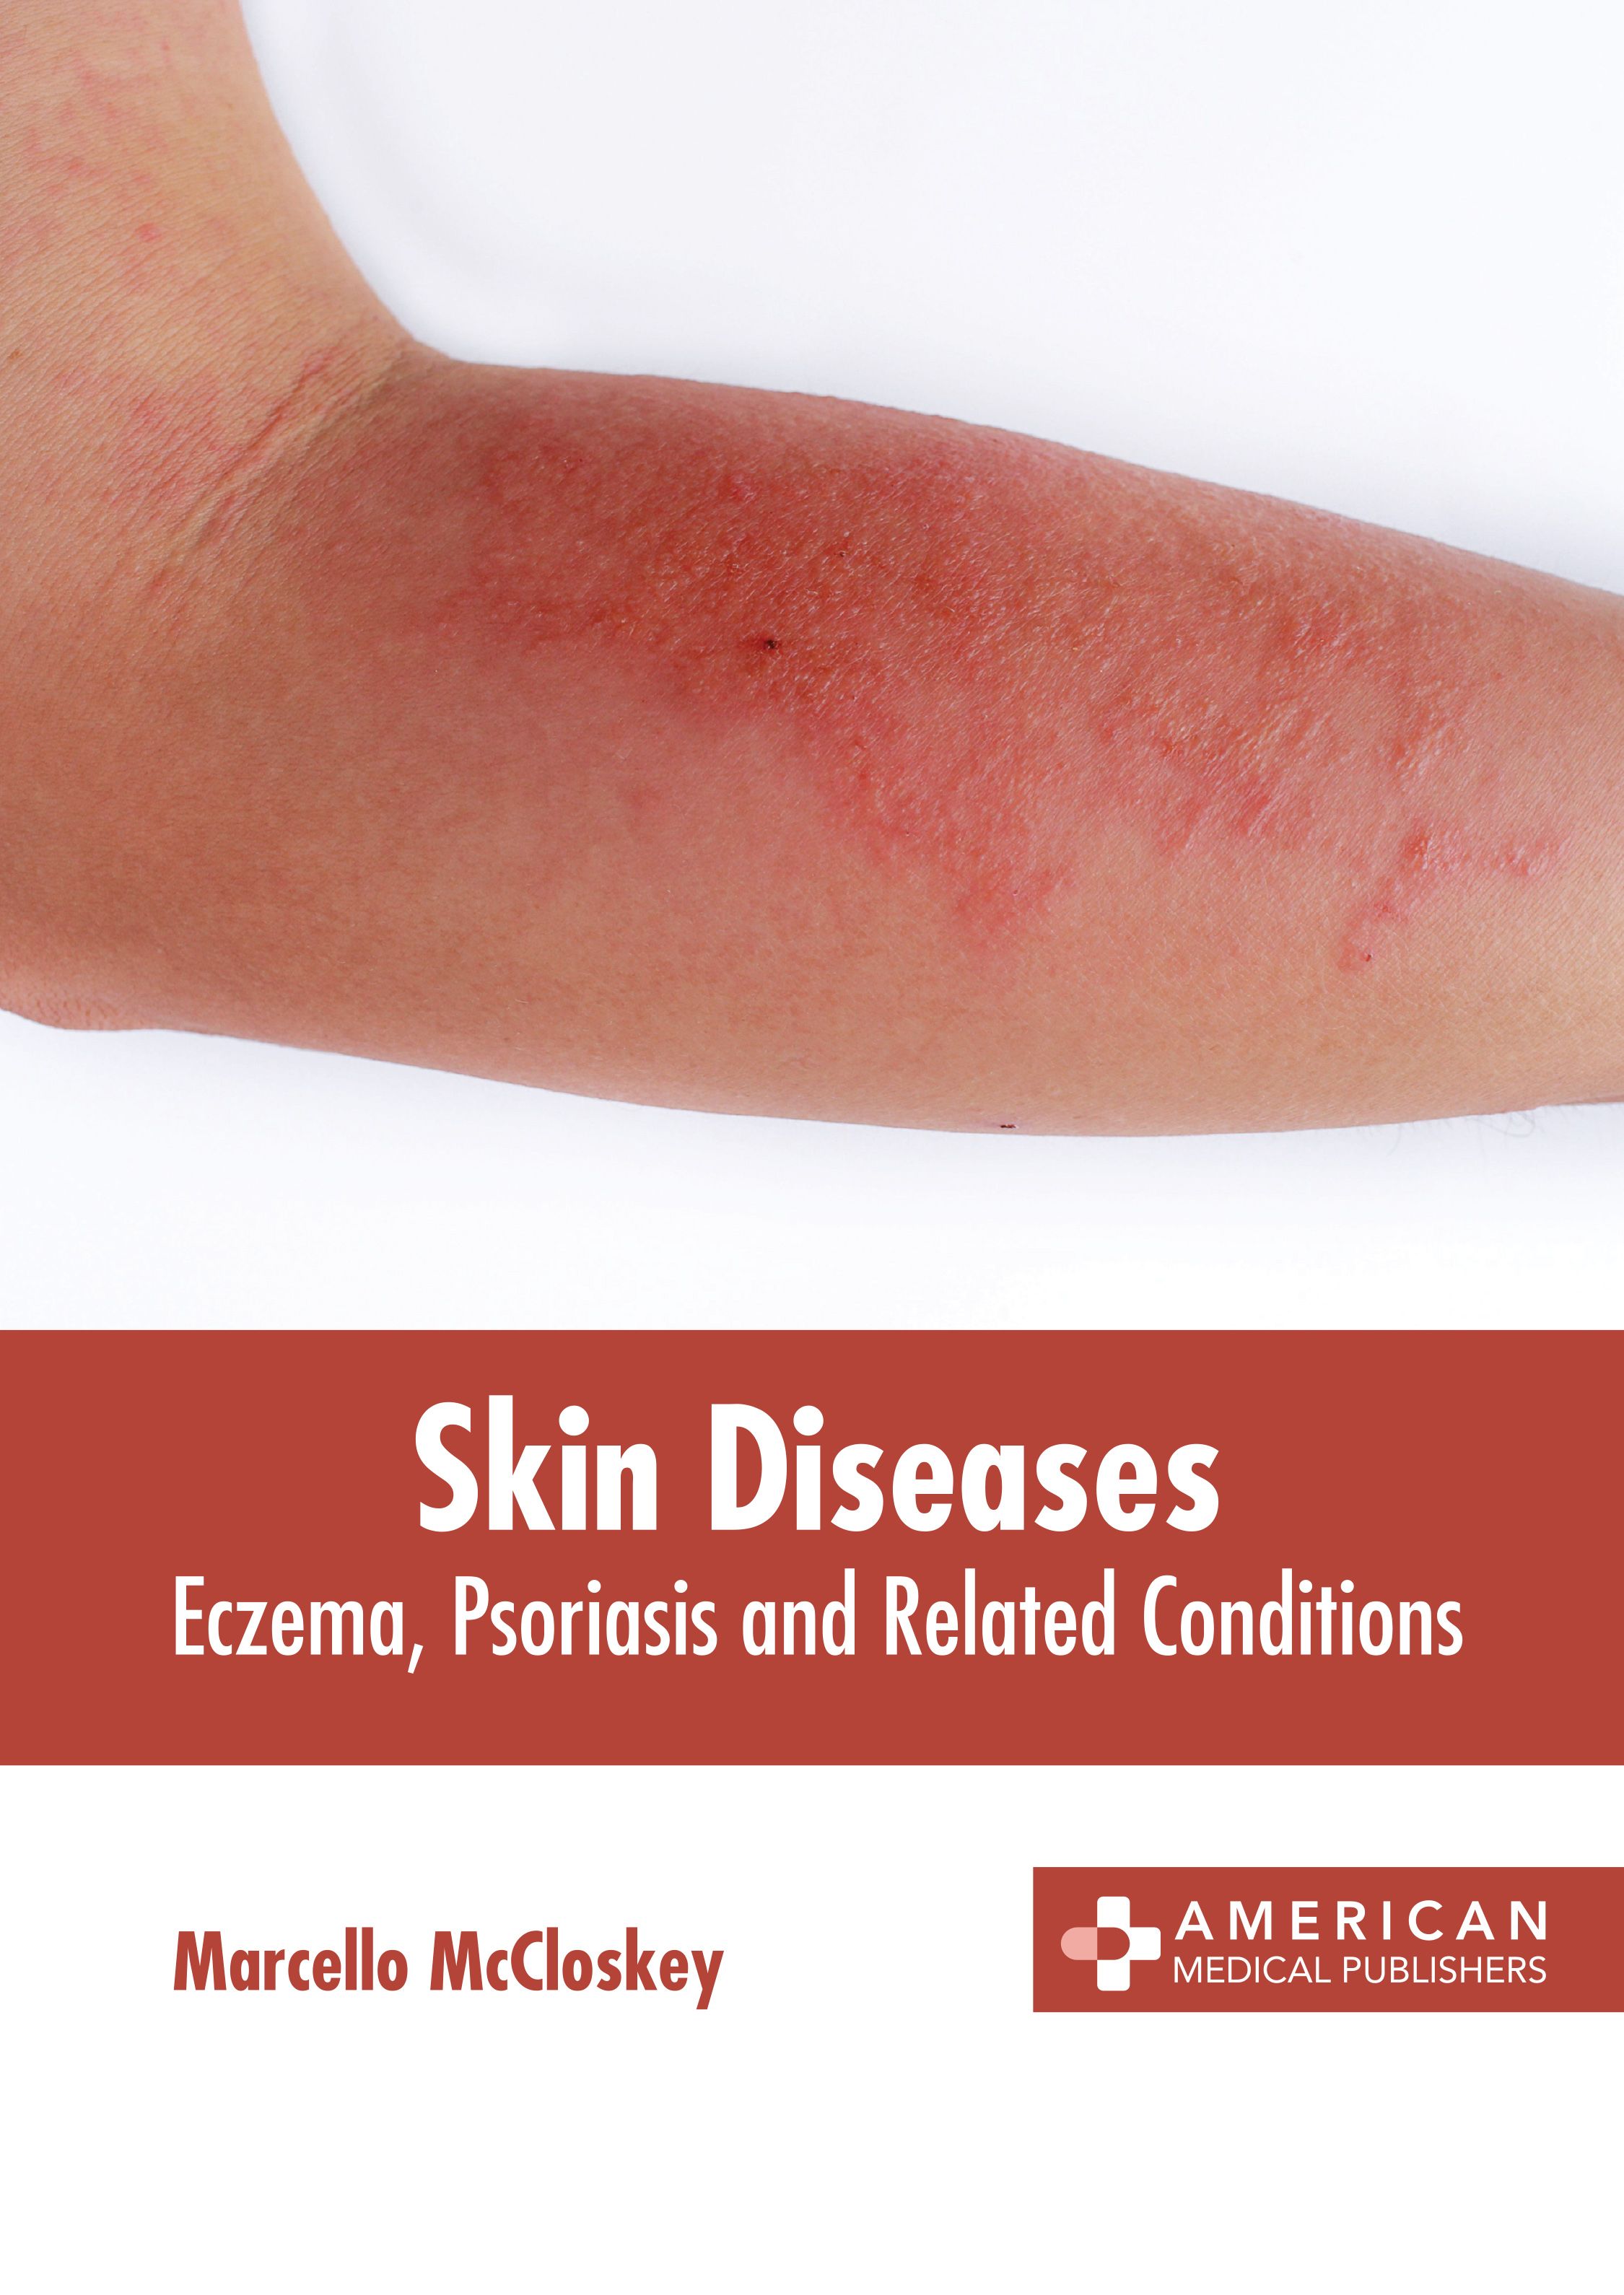 

medical-reference-books/dermatology/skin-diseases-eczema-psoriasis-and-related-conditions-9781639278053